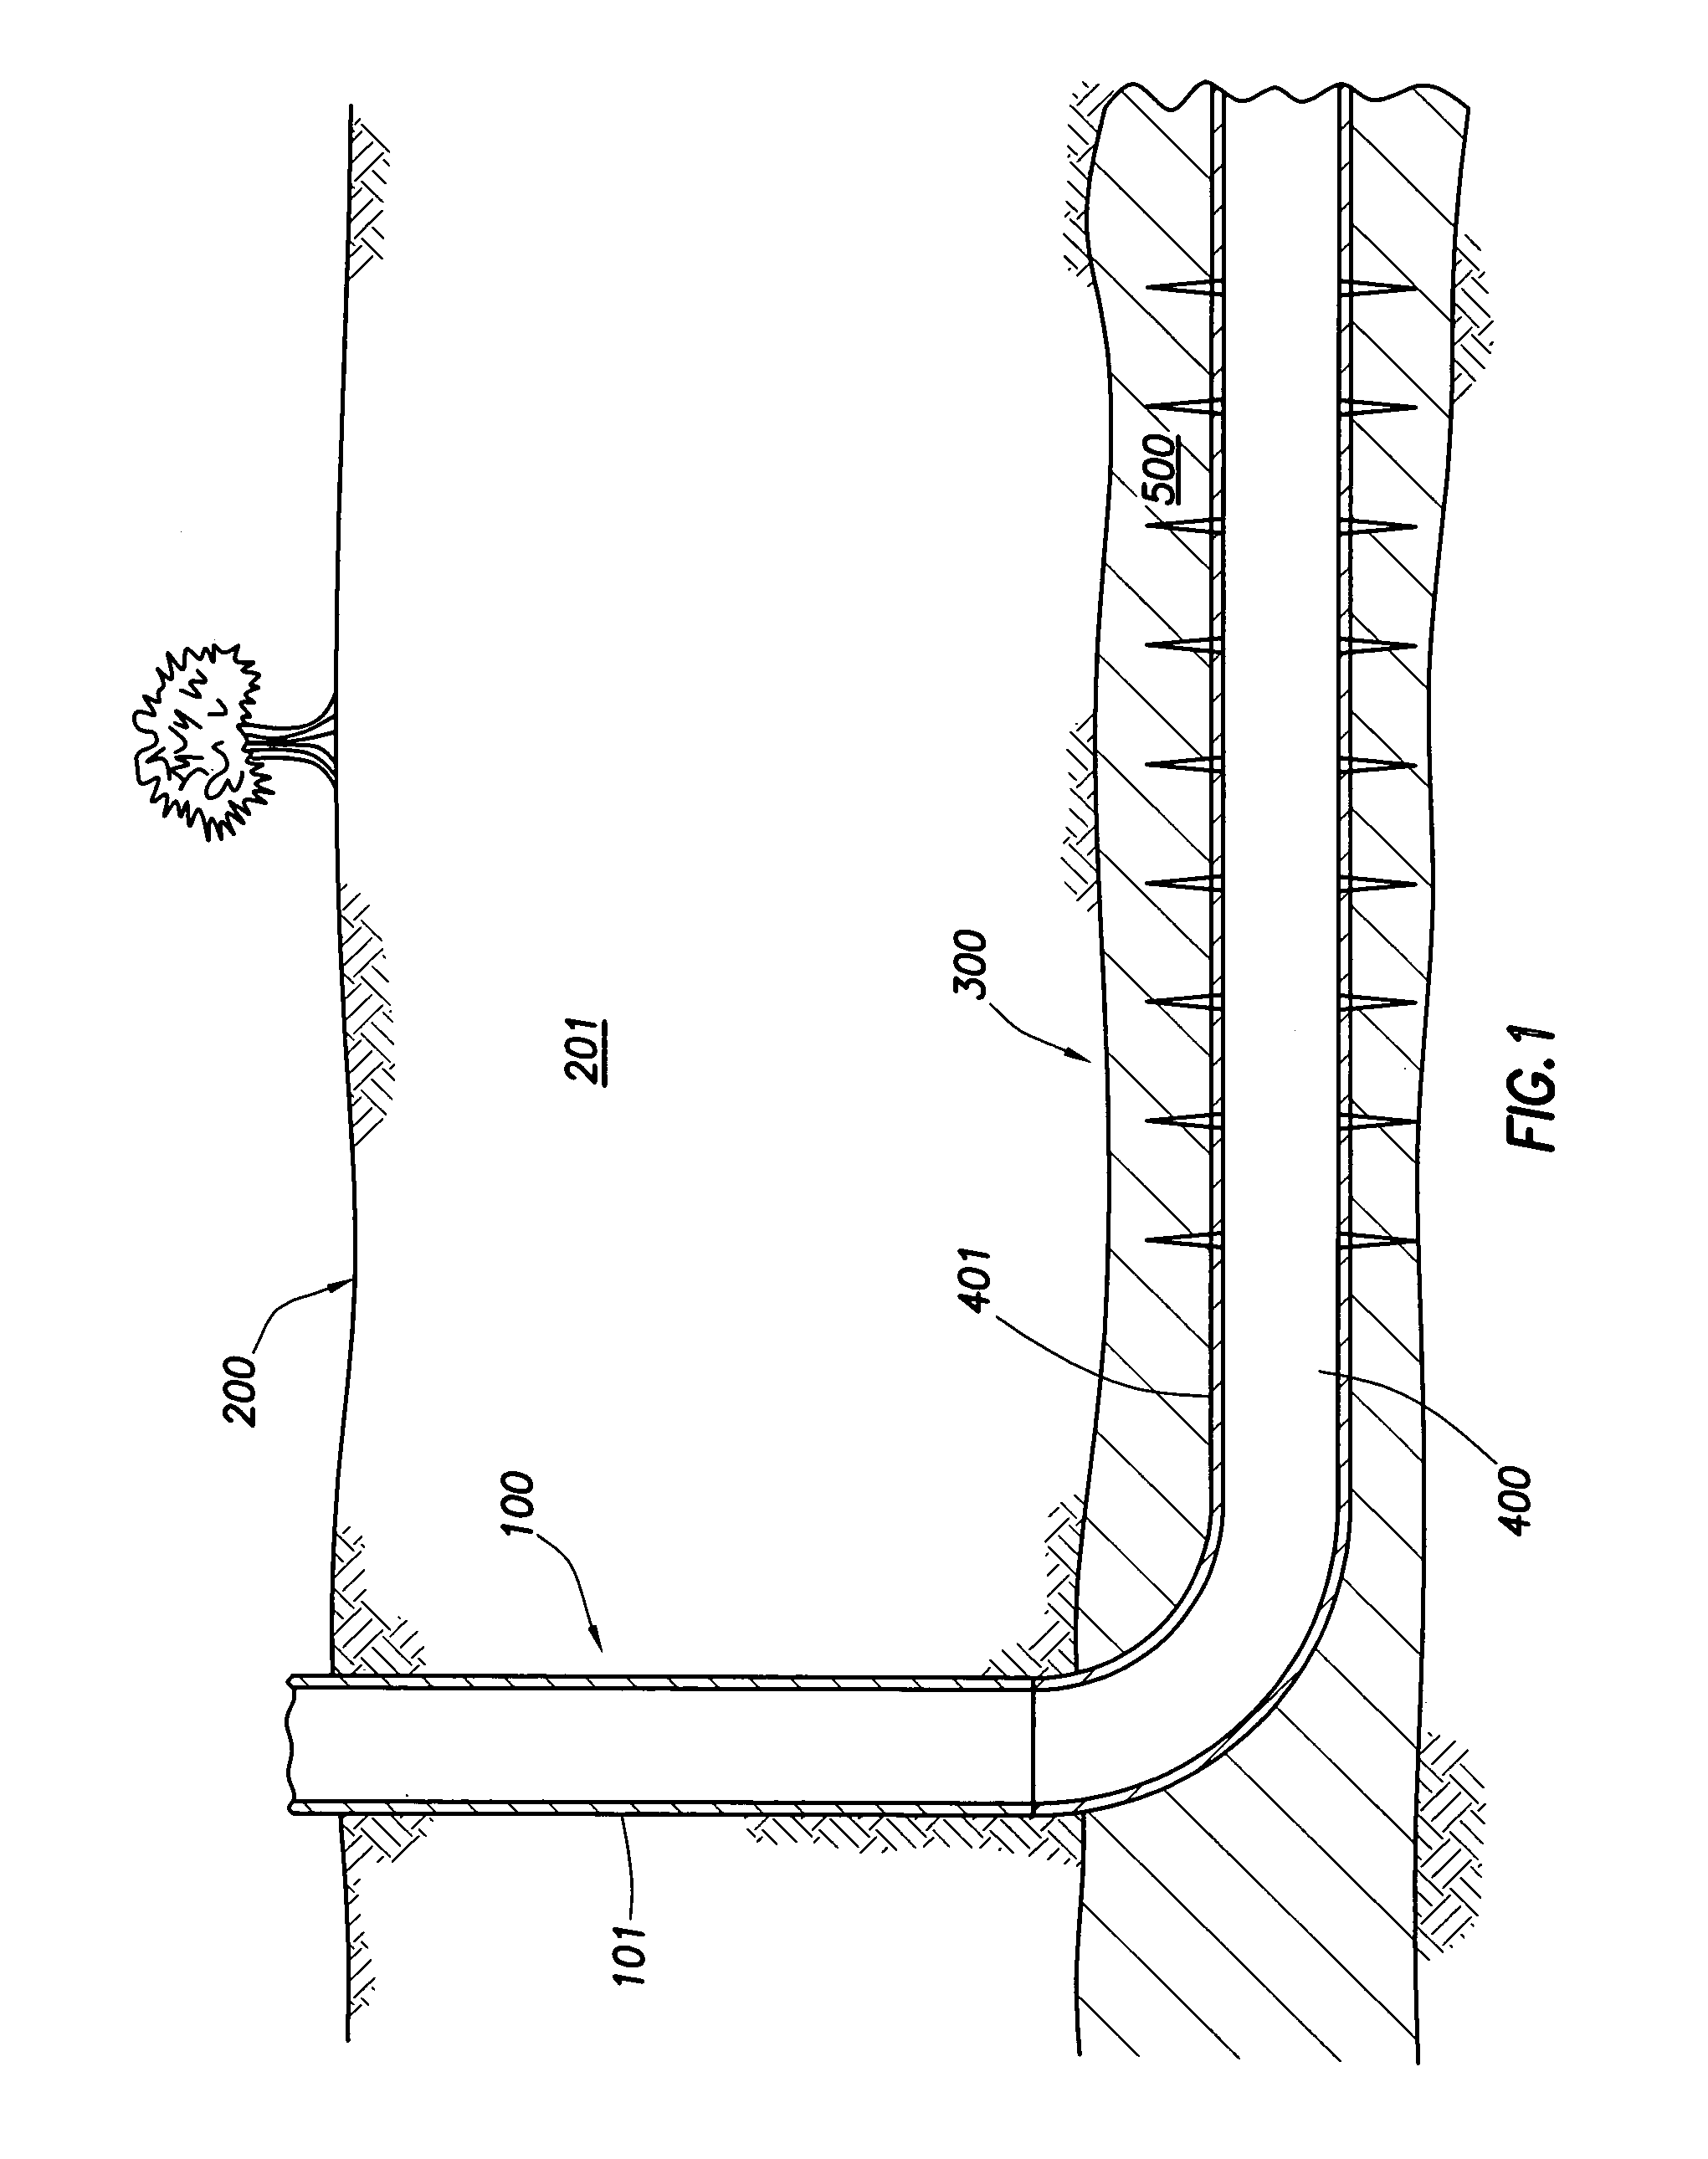 Method of optimizing production of gas from subterranean formations